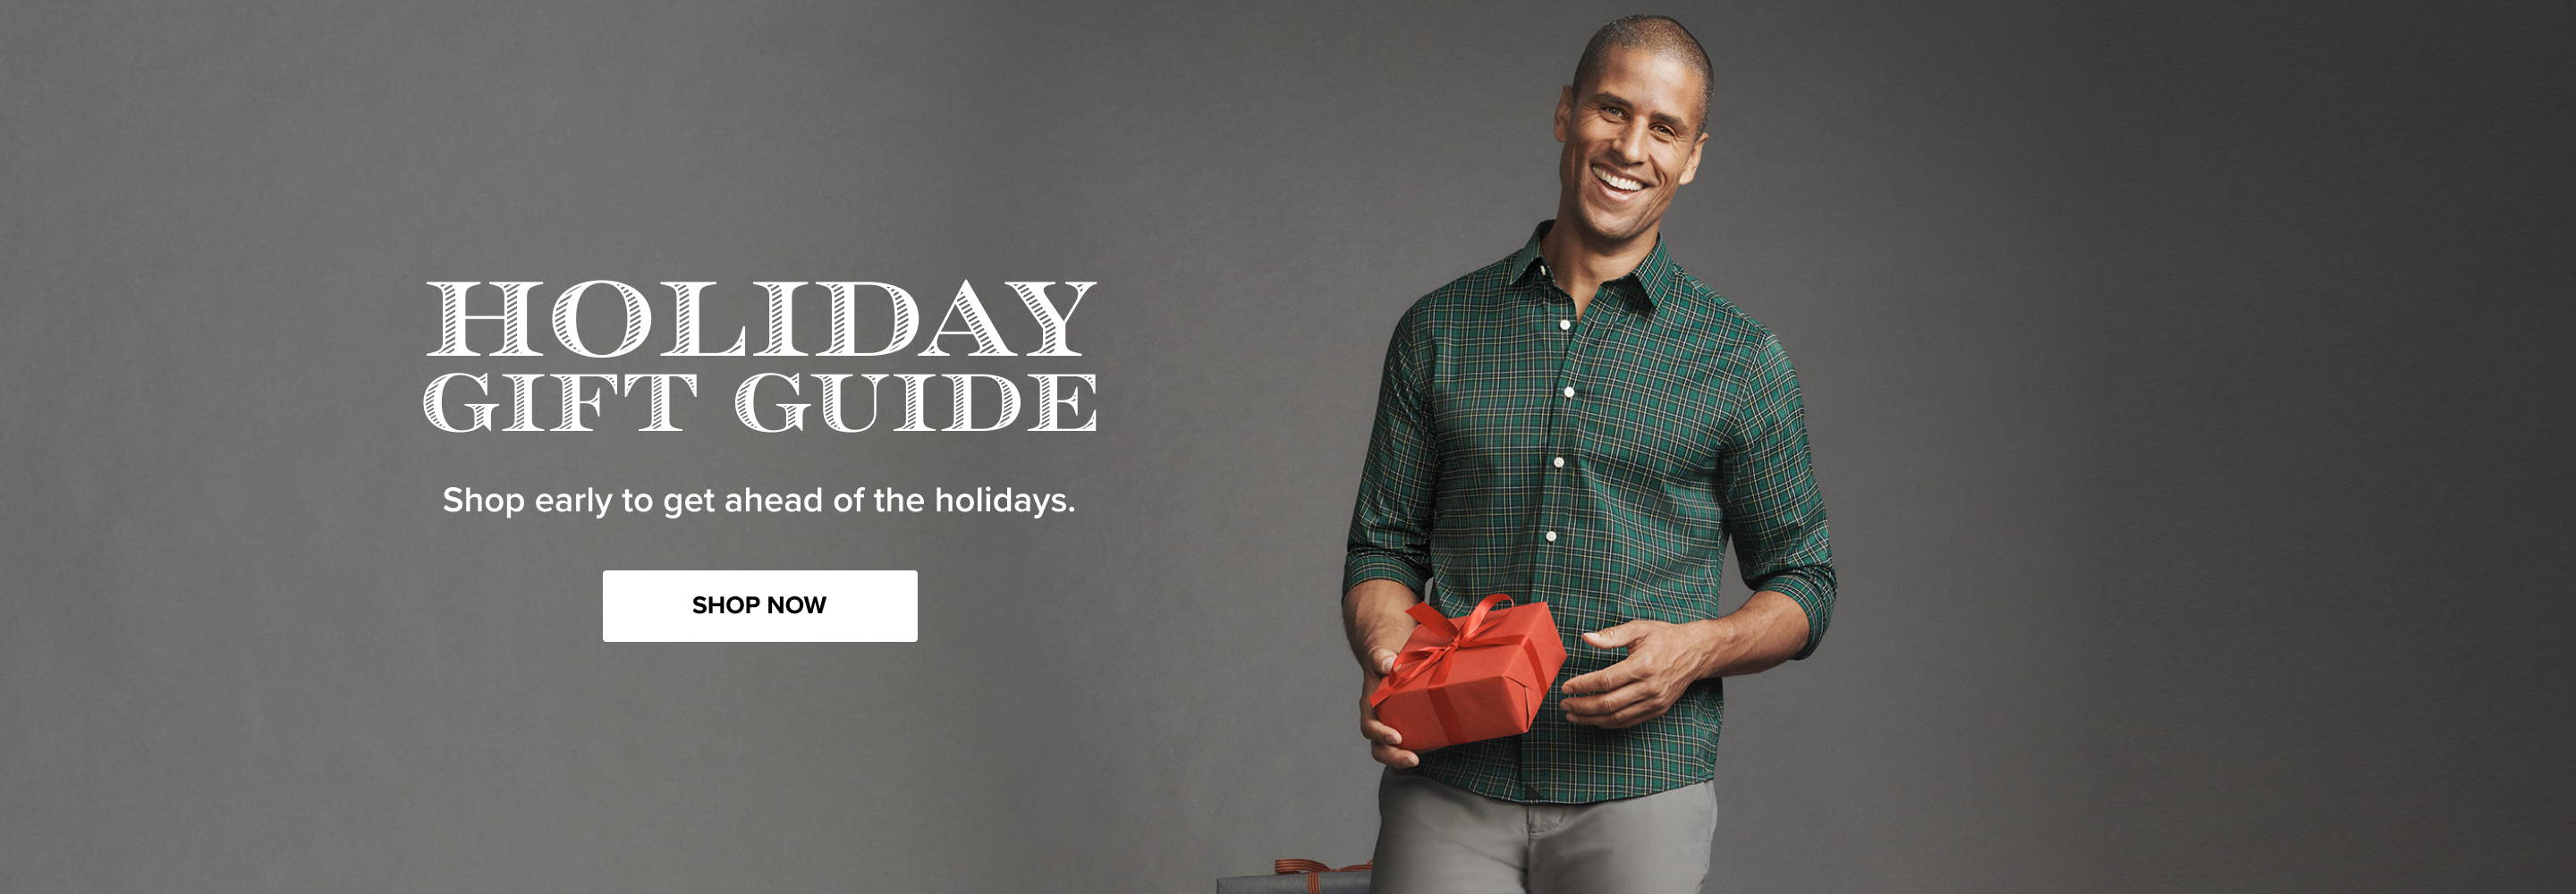 Holiday Gift Guide— Shop early to get ahead of the holidays. Shop Now